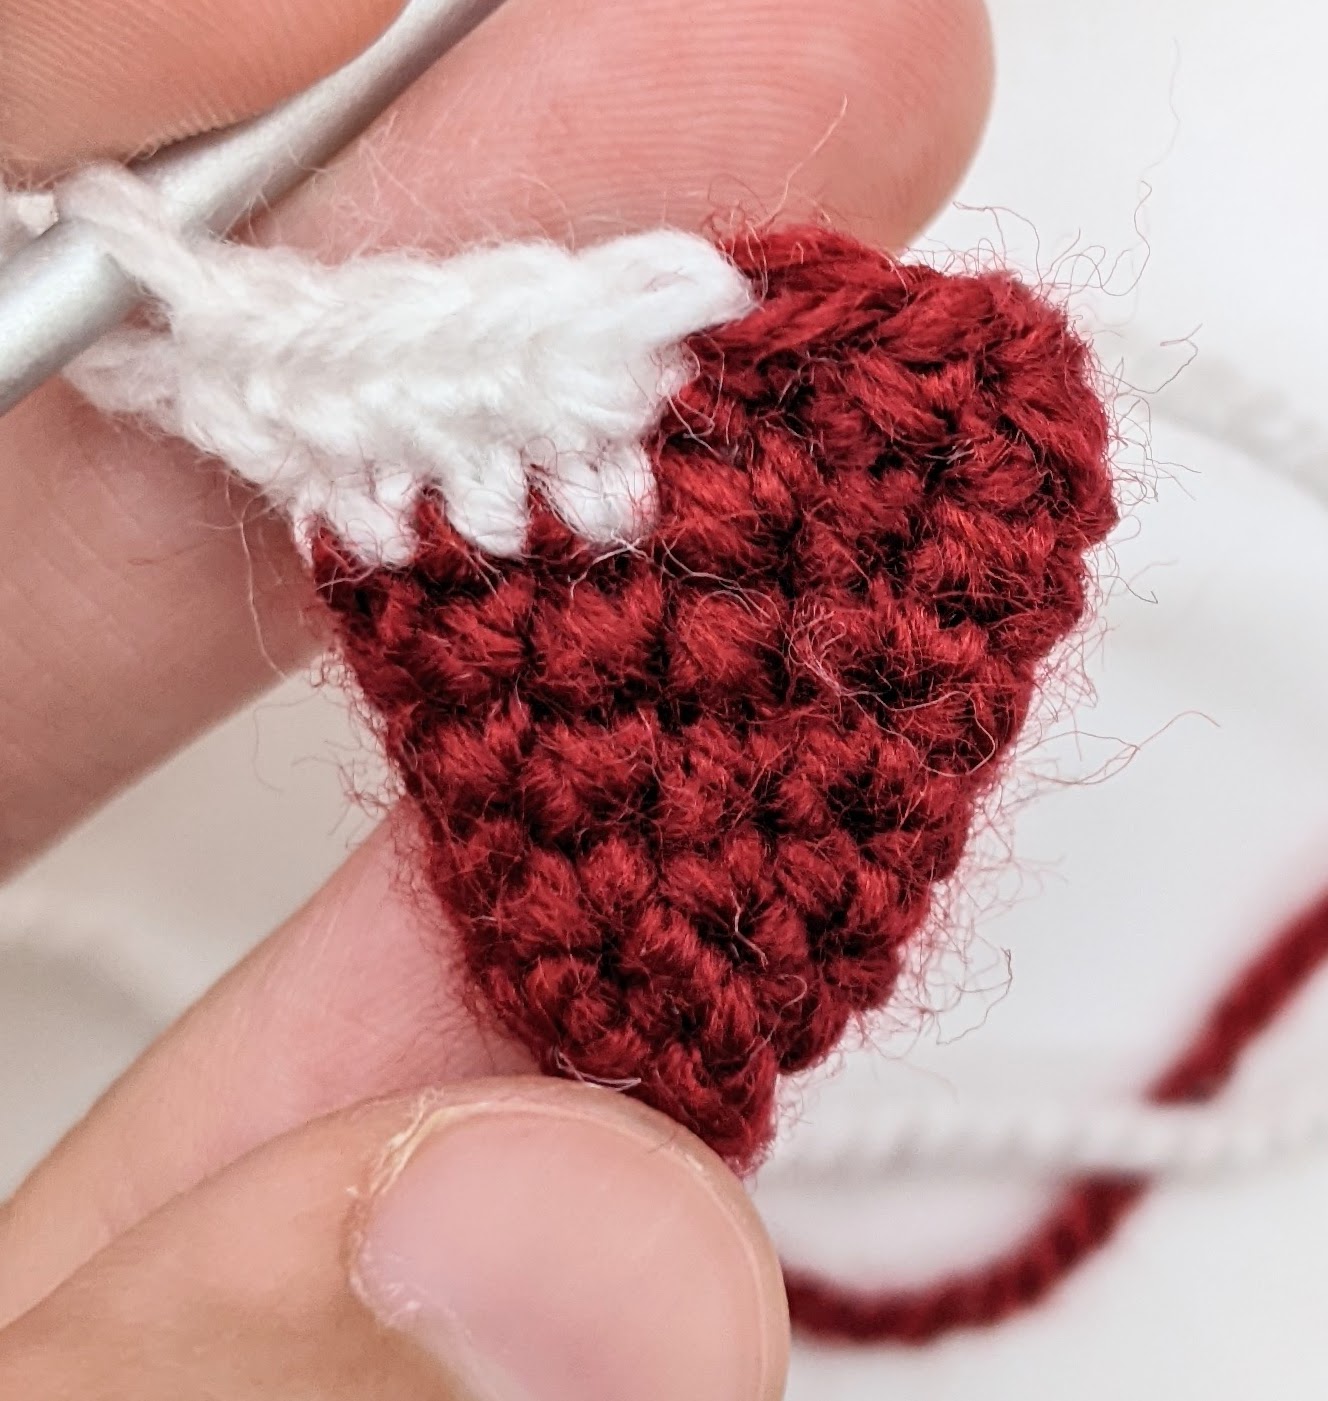 How to join yarn in knitting - 10 easy techniques you need to know [+video]